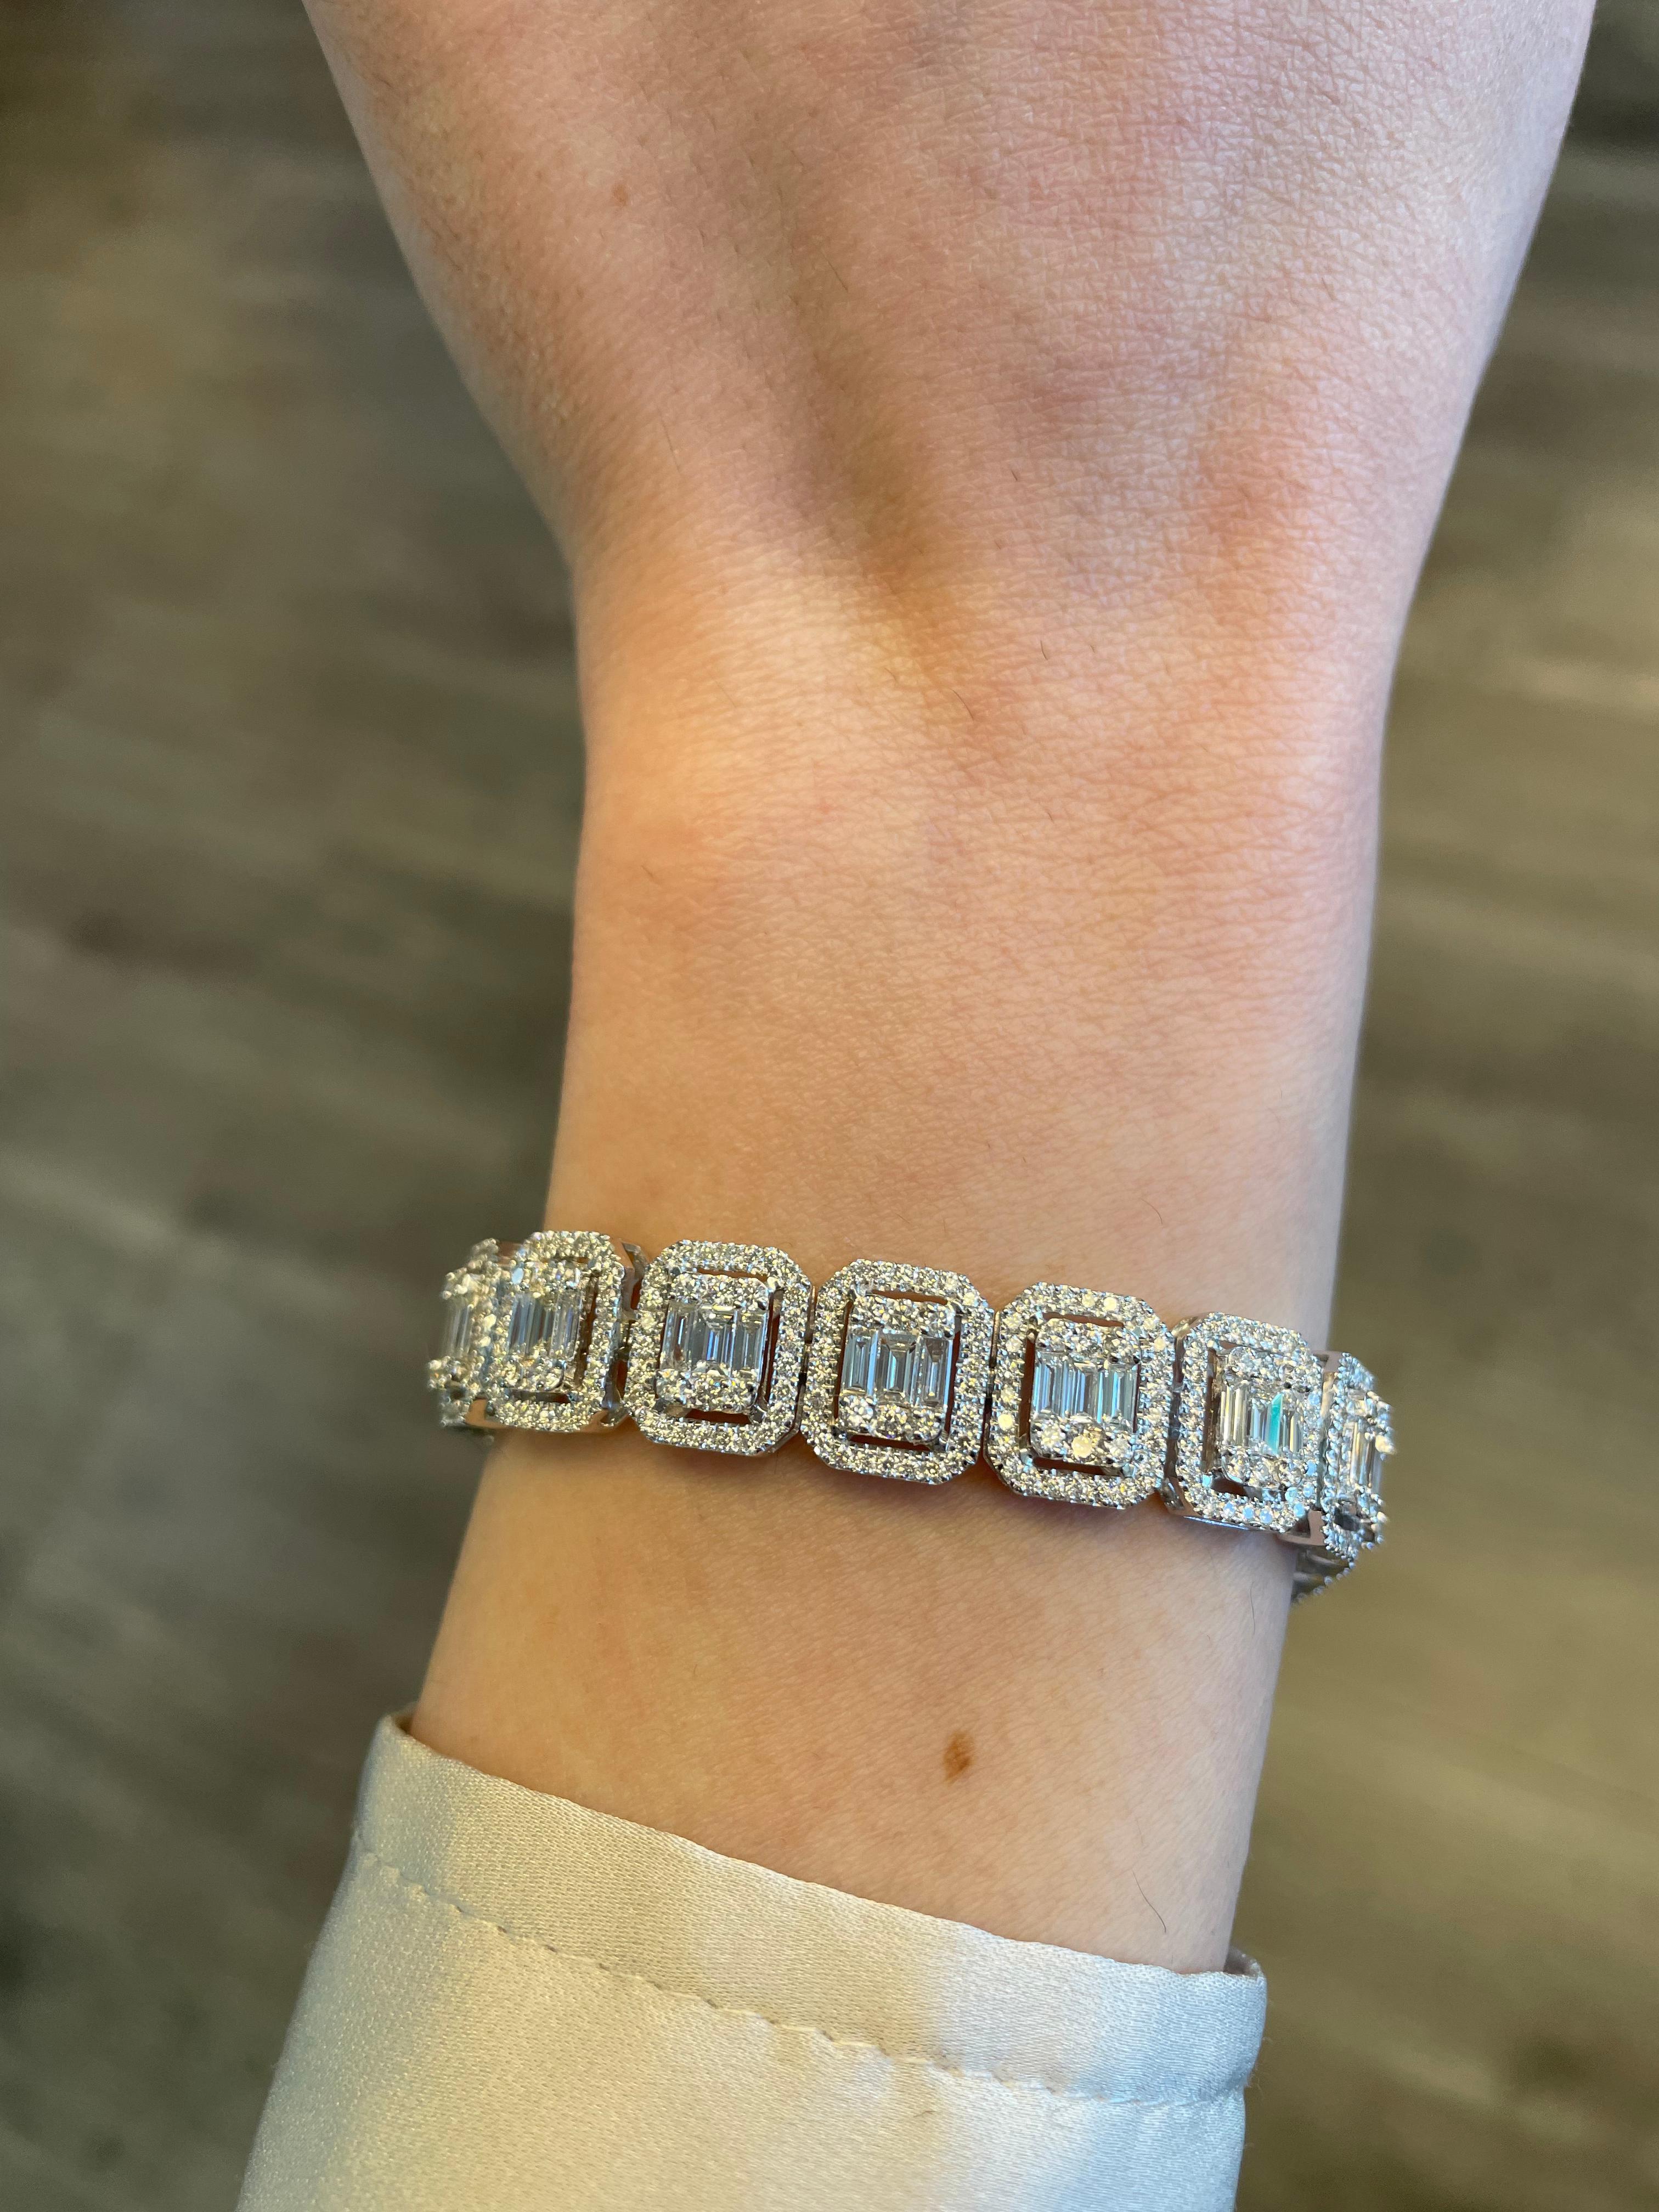 Sensational illusion set diamond bracelet with the look of emerald cut diamonds. High jewelry by Alexander Beverly Hills.
700 round and baguette cut diamonds, 9.06 carats. Approximately G/H color and VS clarity. 18k white gold, 24.97.
Accommodated